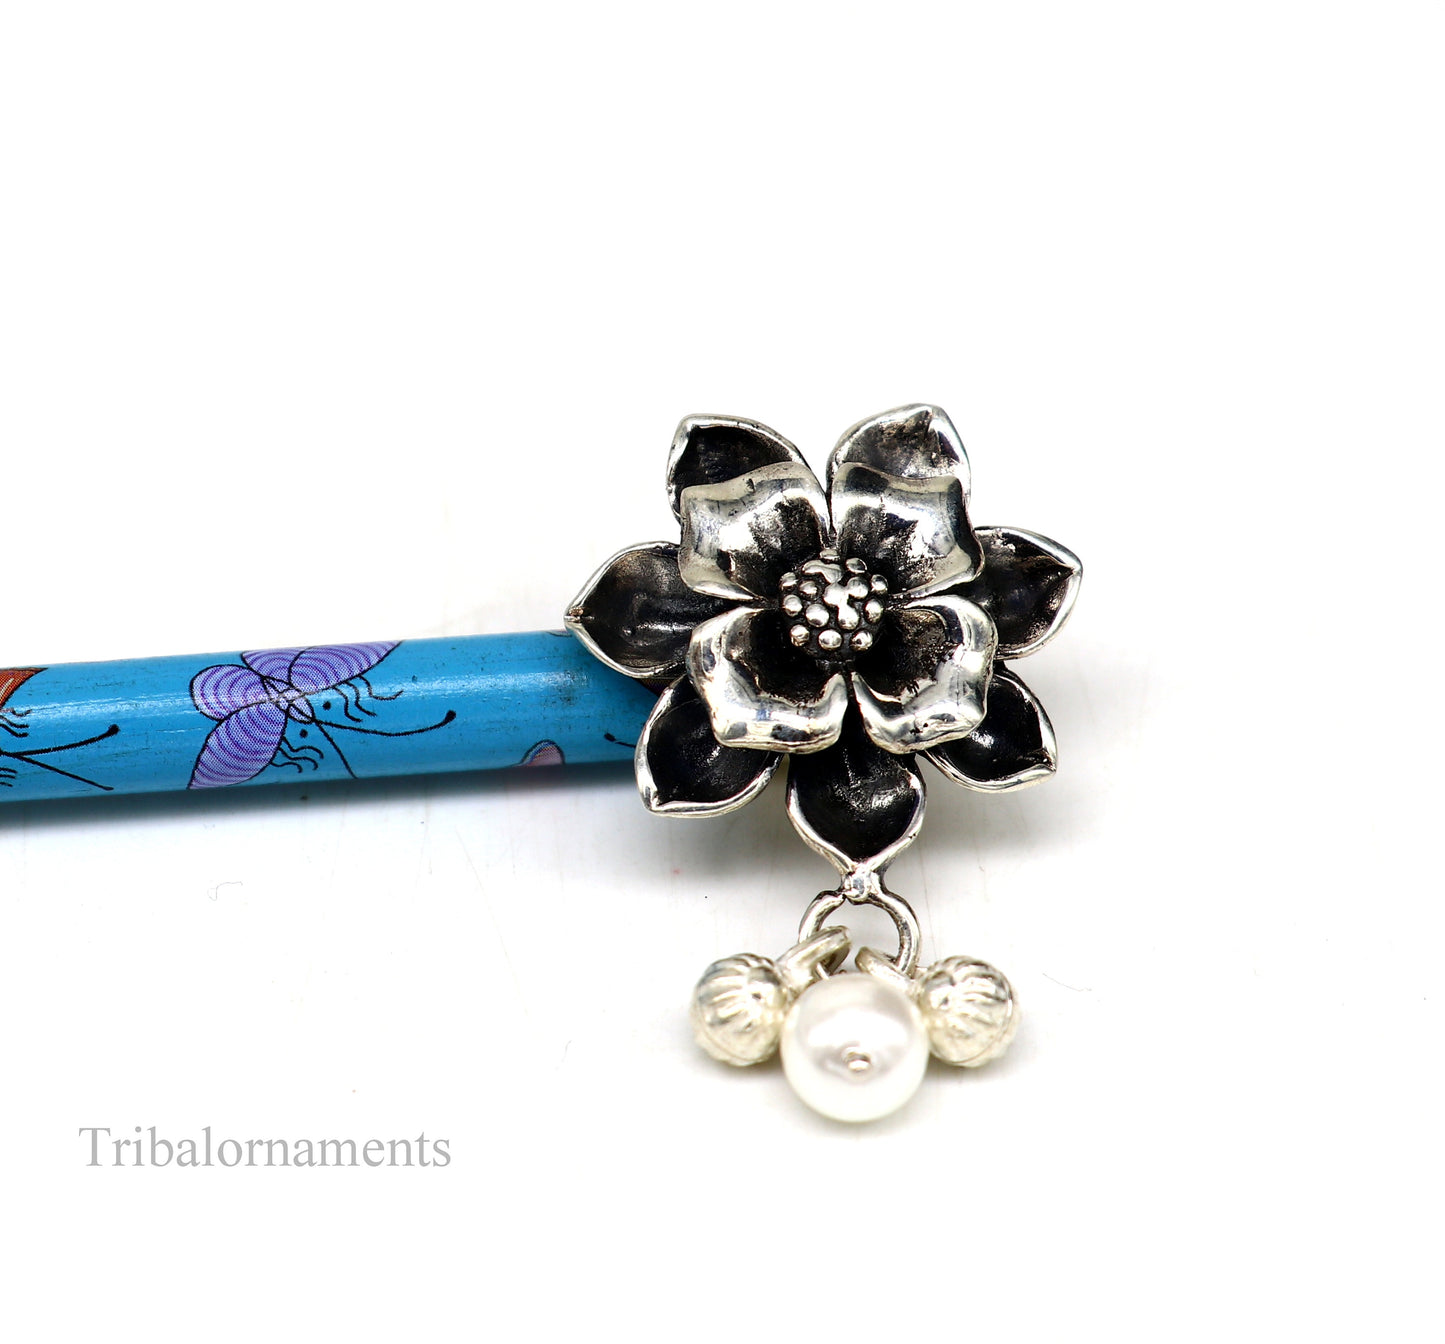 Vintage style 925 sterling silver handmade rose flower design hair jewelry with wooden stick and pearl, best brides jewelry collection hc12 - TRIBAL ORNAMENTS